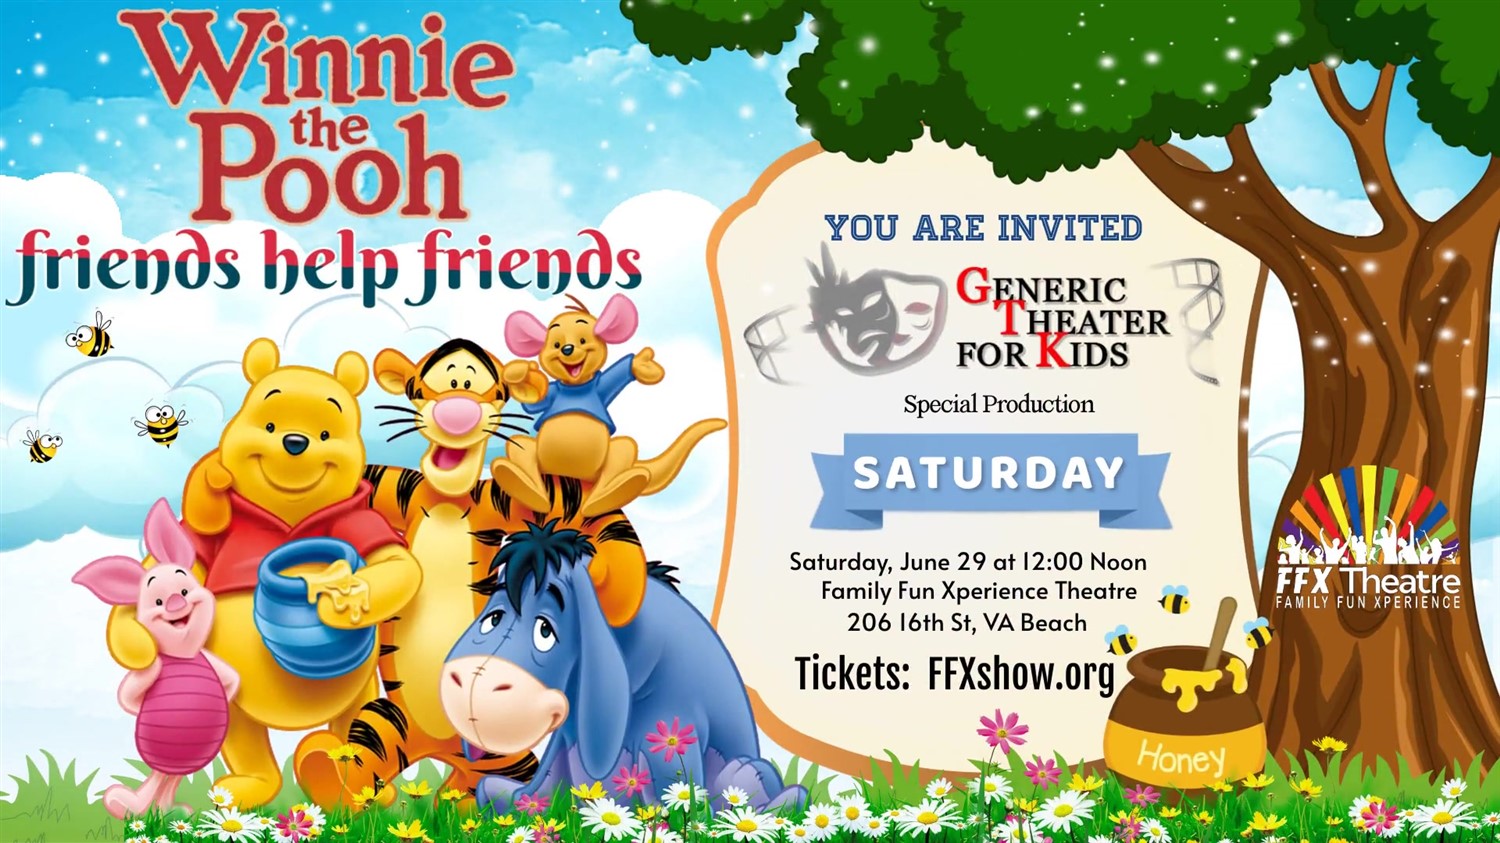 WINNIE THE POOH: FRIENDS HELP FRIENDS A special production from Generic Kids Theatre Camp on Jun 29, 12:00@FFX Theatre - Pick a seat, Buy tickets and Get information on Family Fun Xperience tickets.ffxshow.org